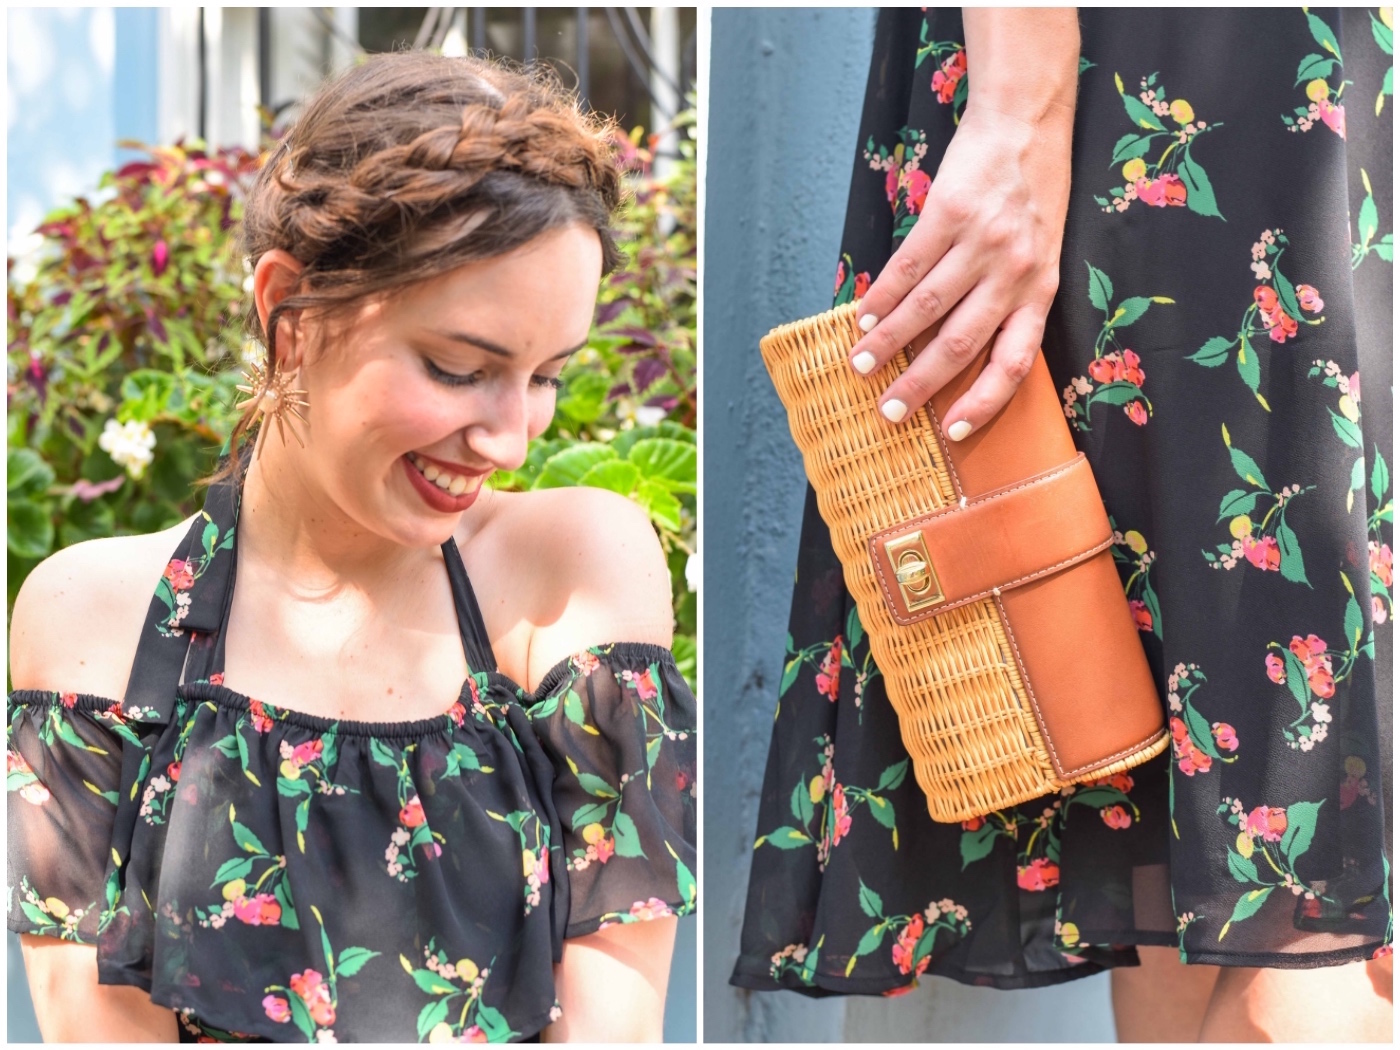 Sharing how to accessorize a black floral dress with a crown braid and a wicker clutch. 